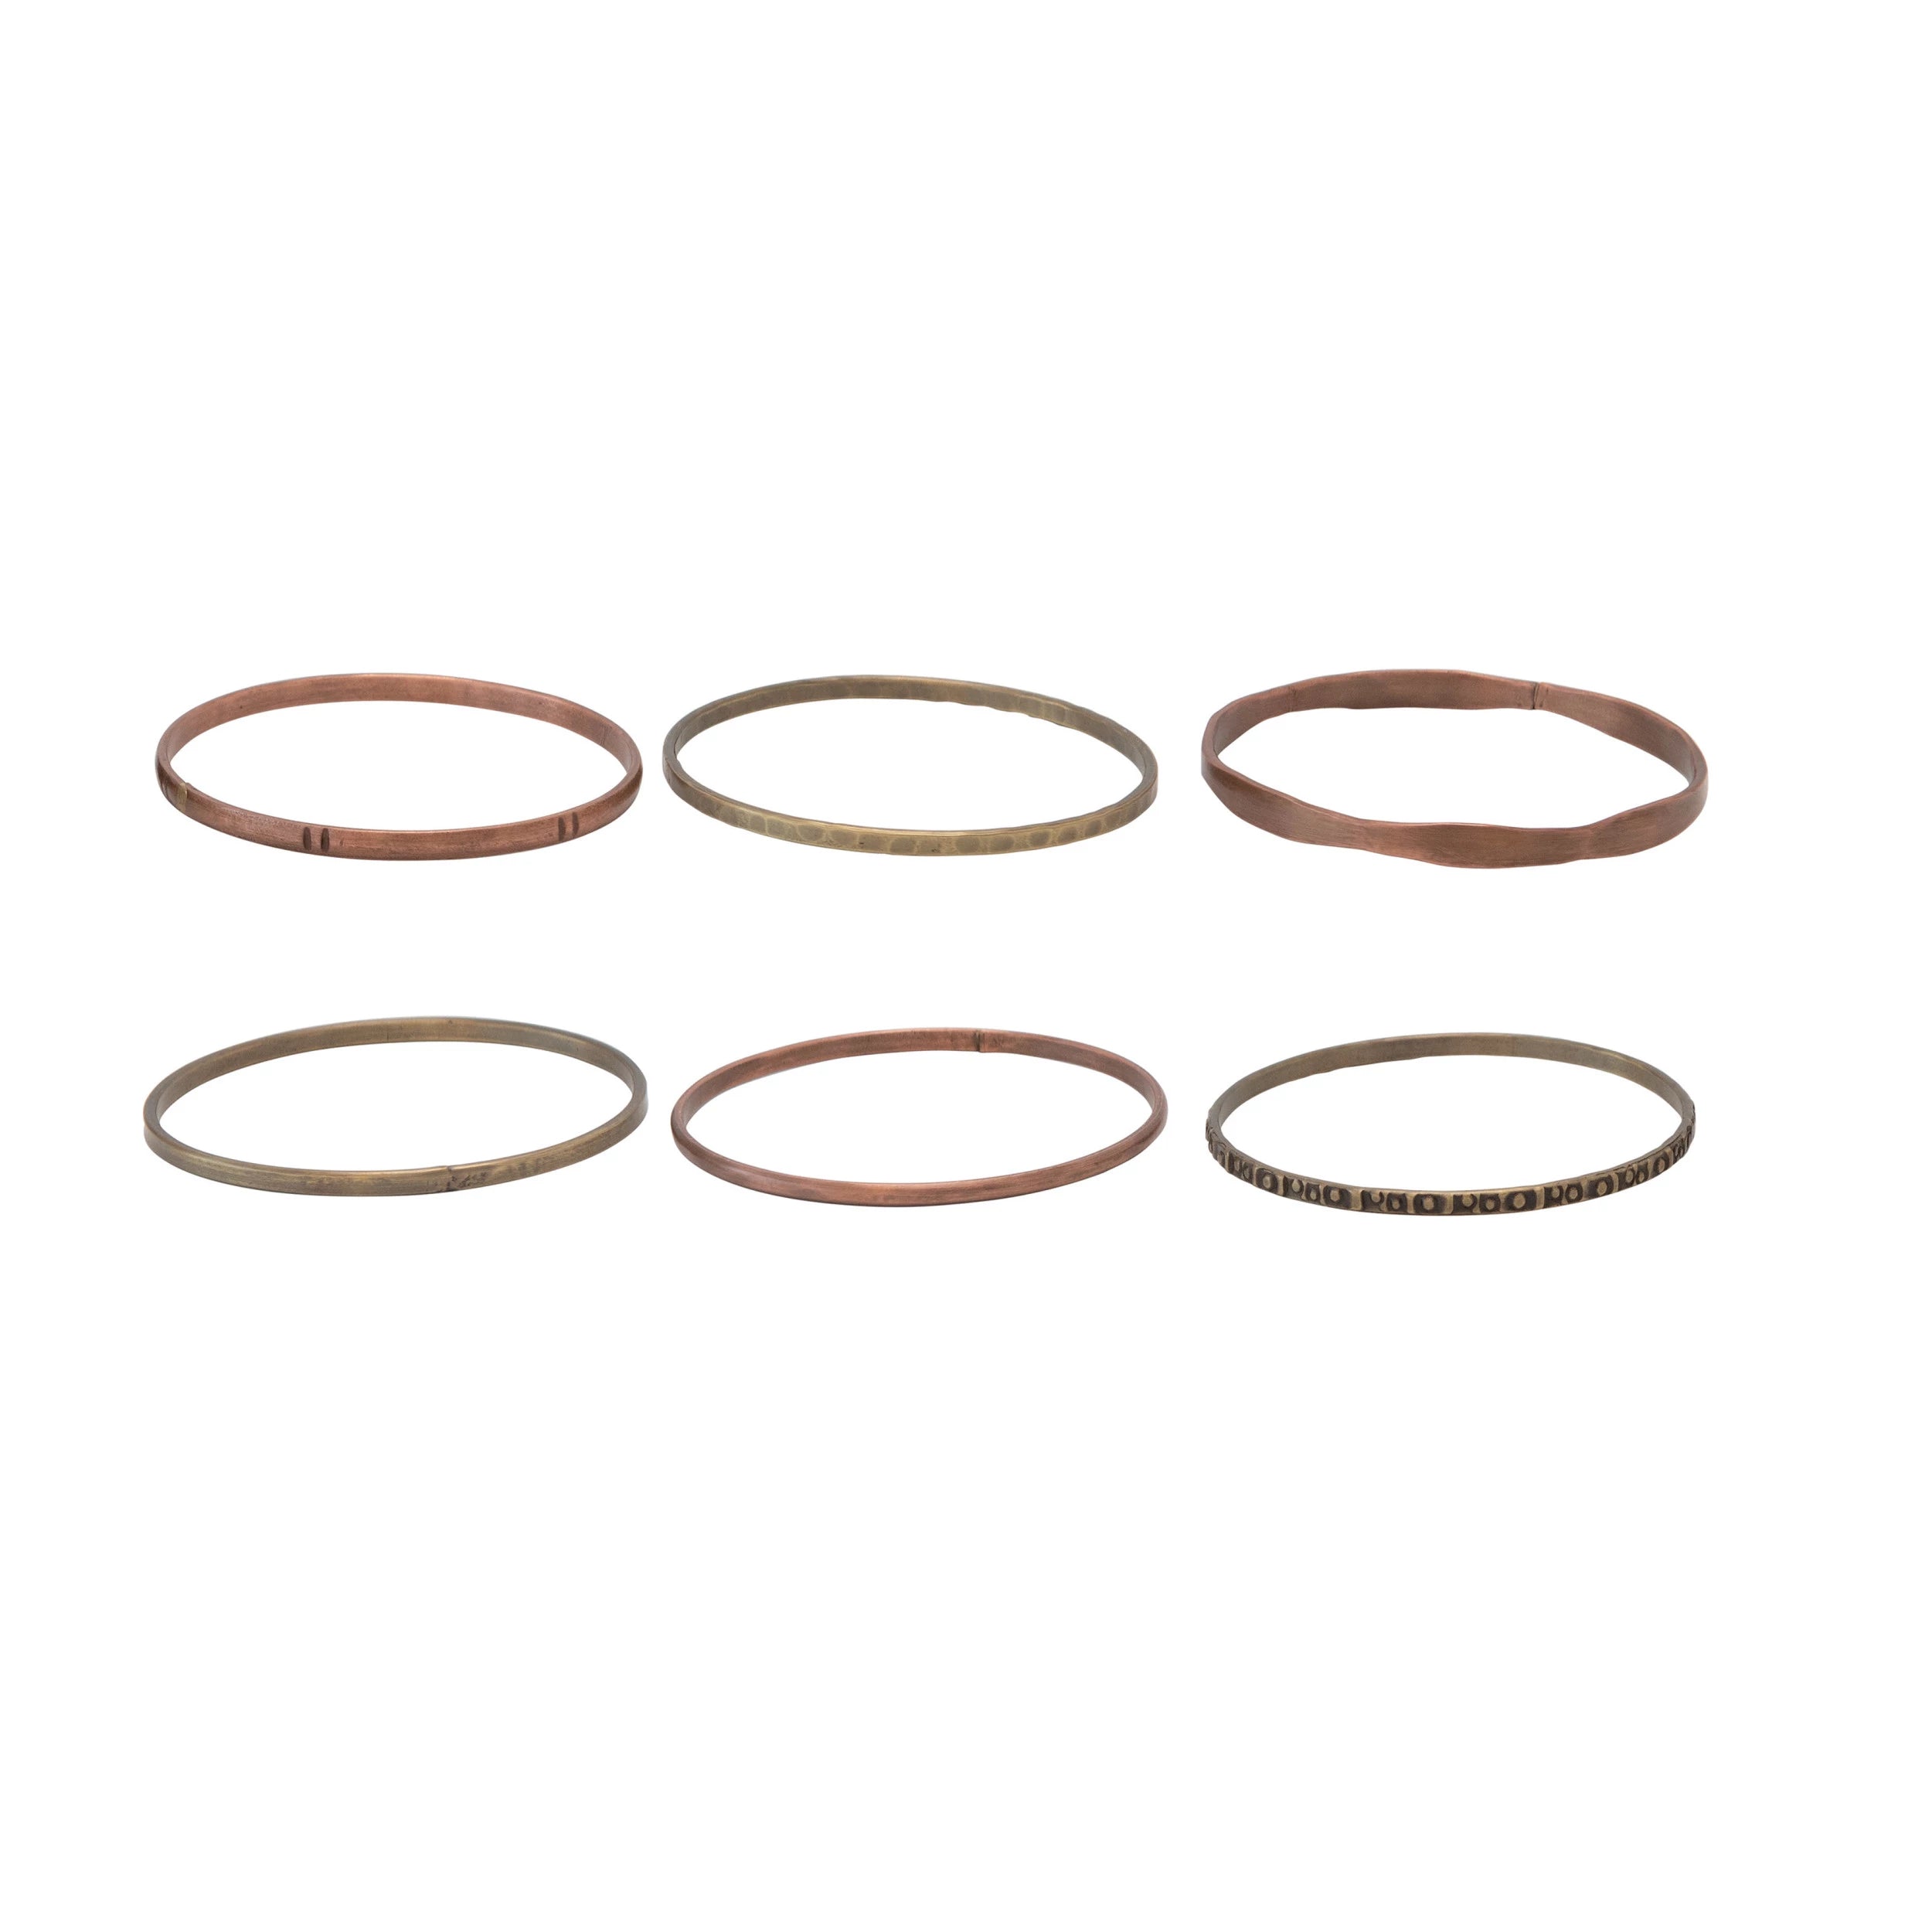 Round Antique Brass and Copper Bangles, Set of 6